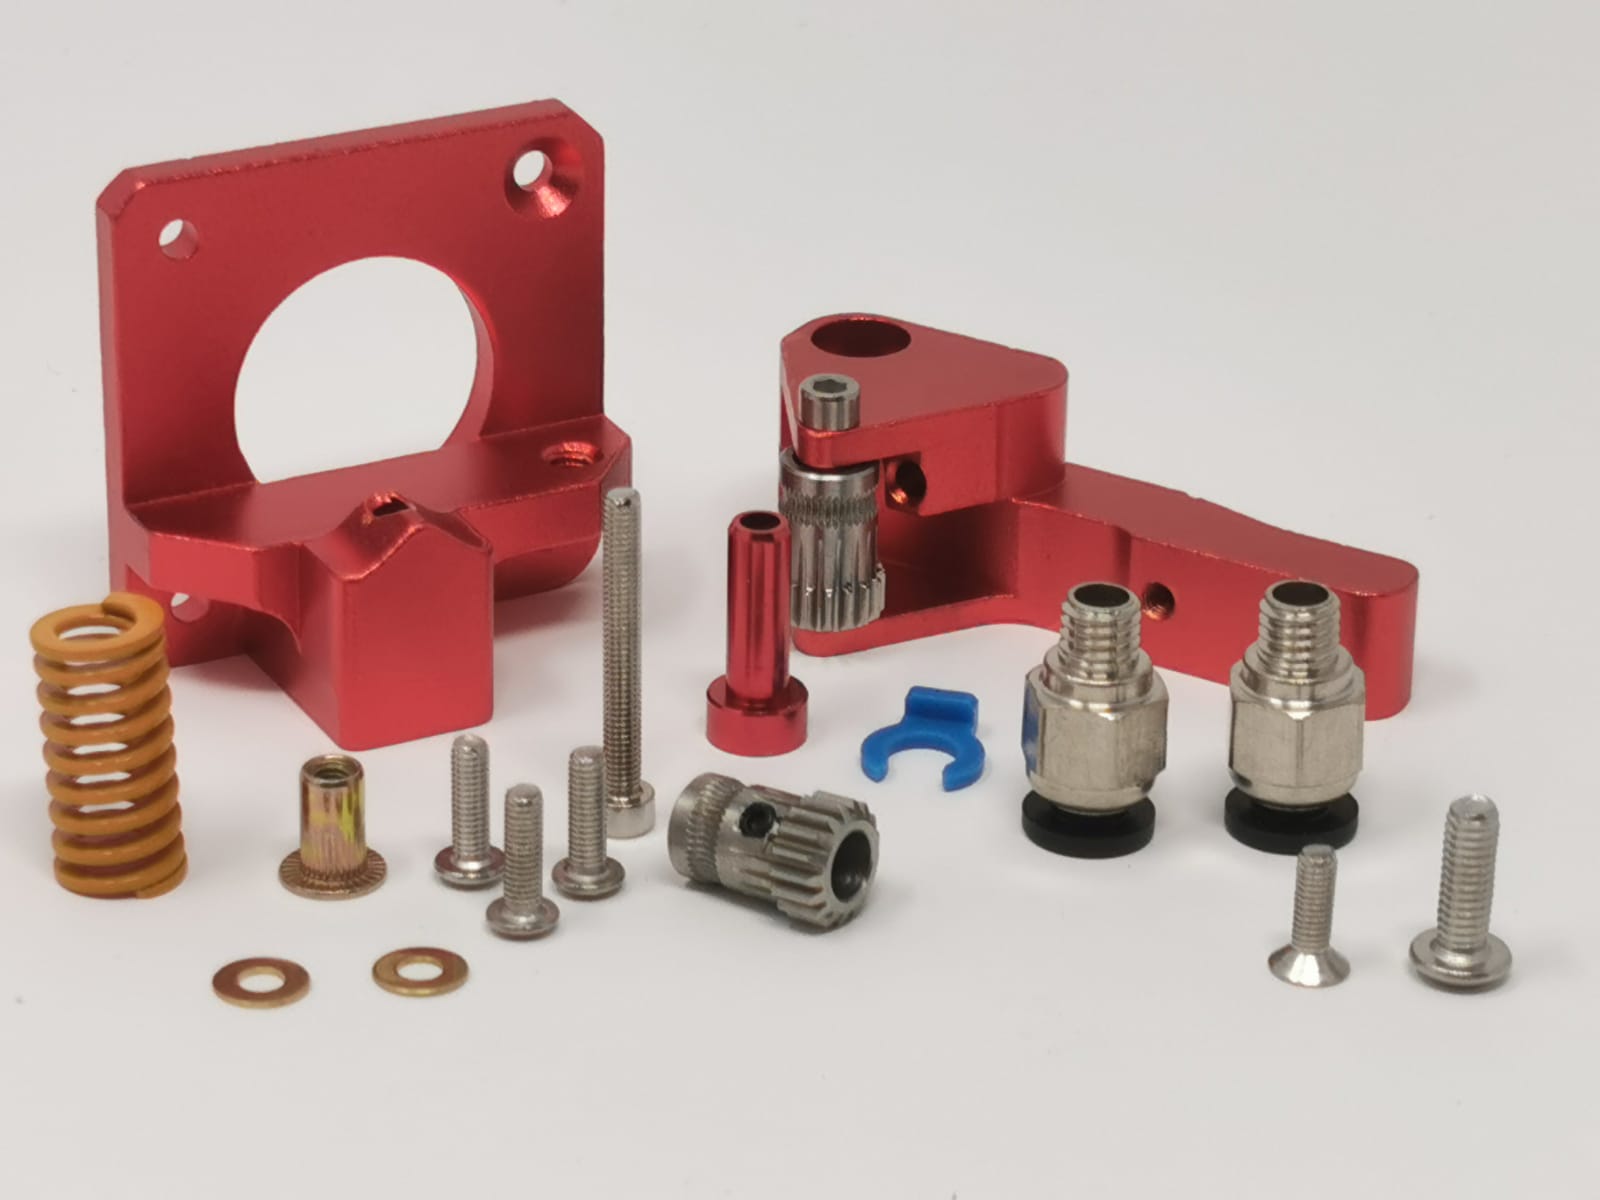 Double Pulley MK8 Extruder